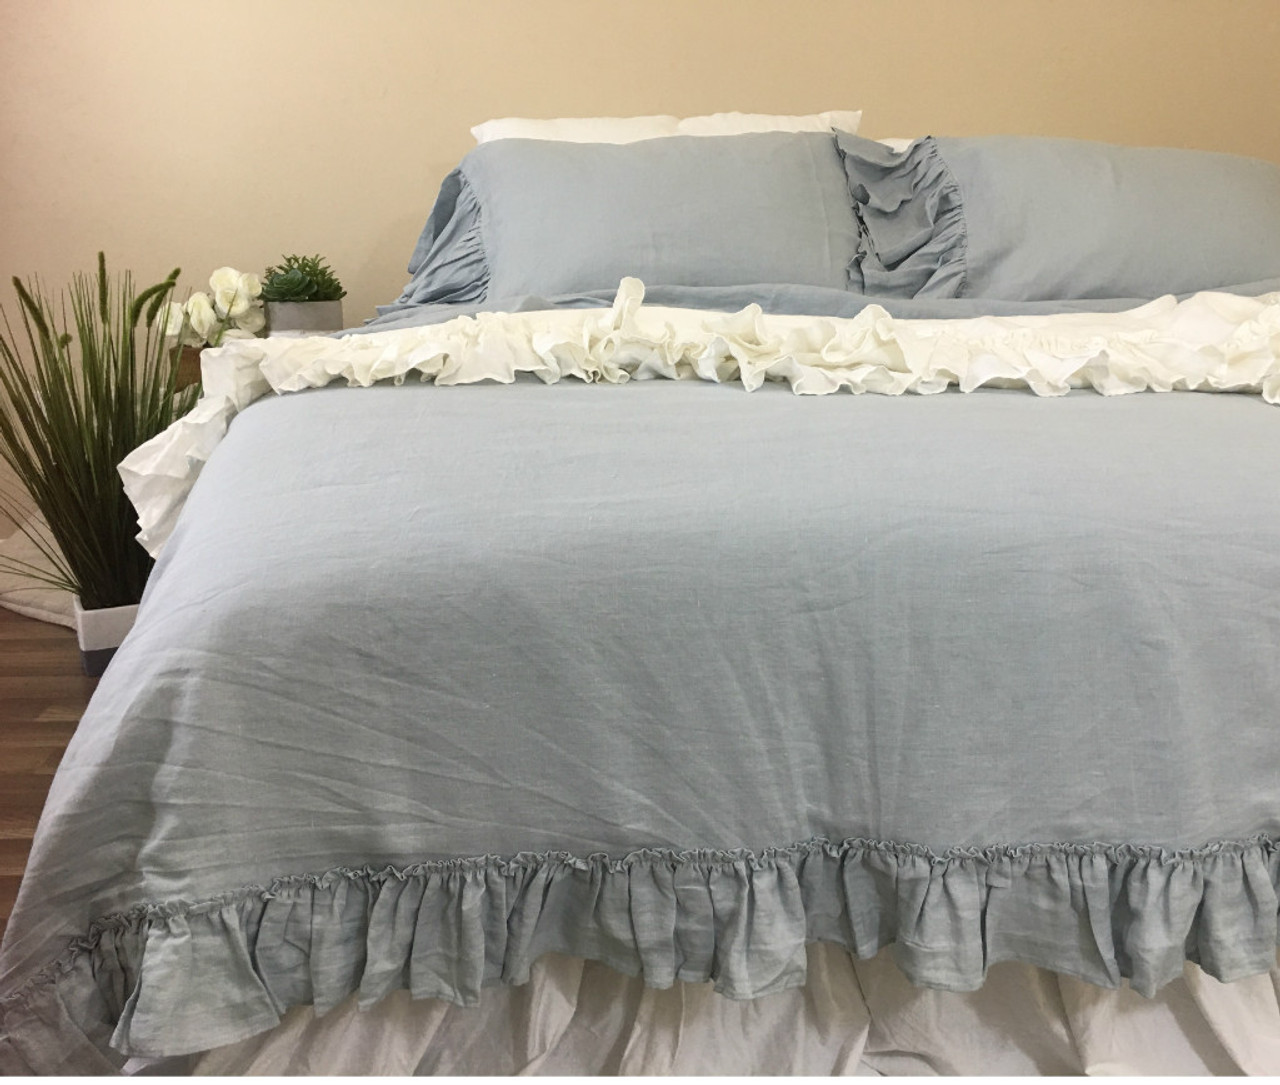 Duck Egg Blue Duvet Cover W Country Ruffle Hem Handcrafted By